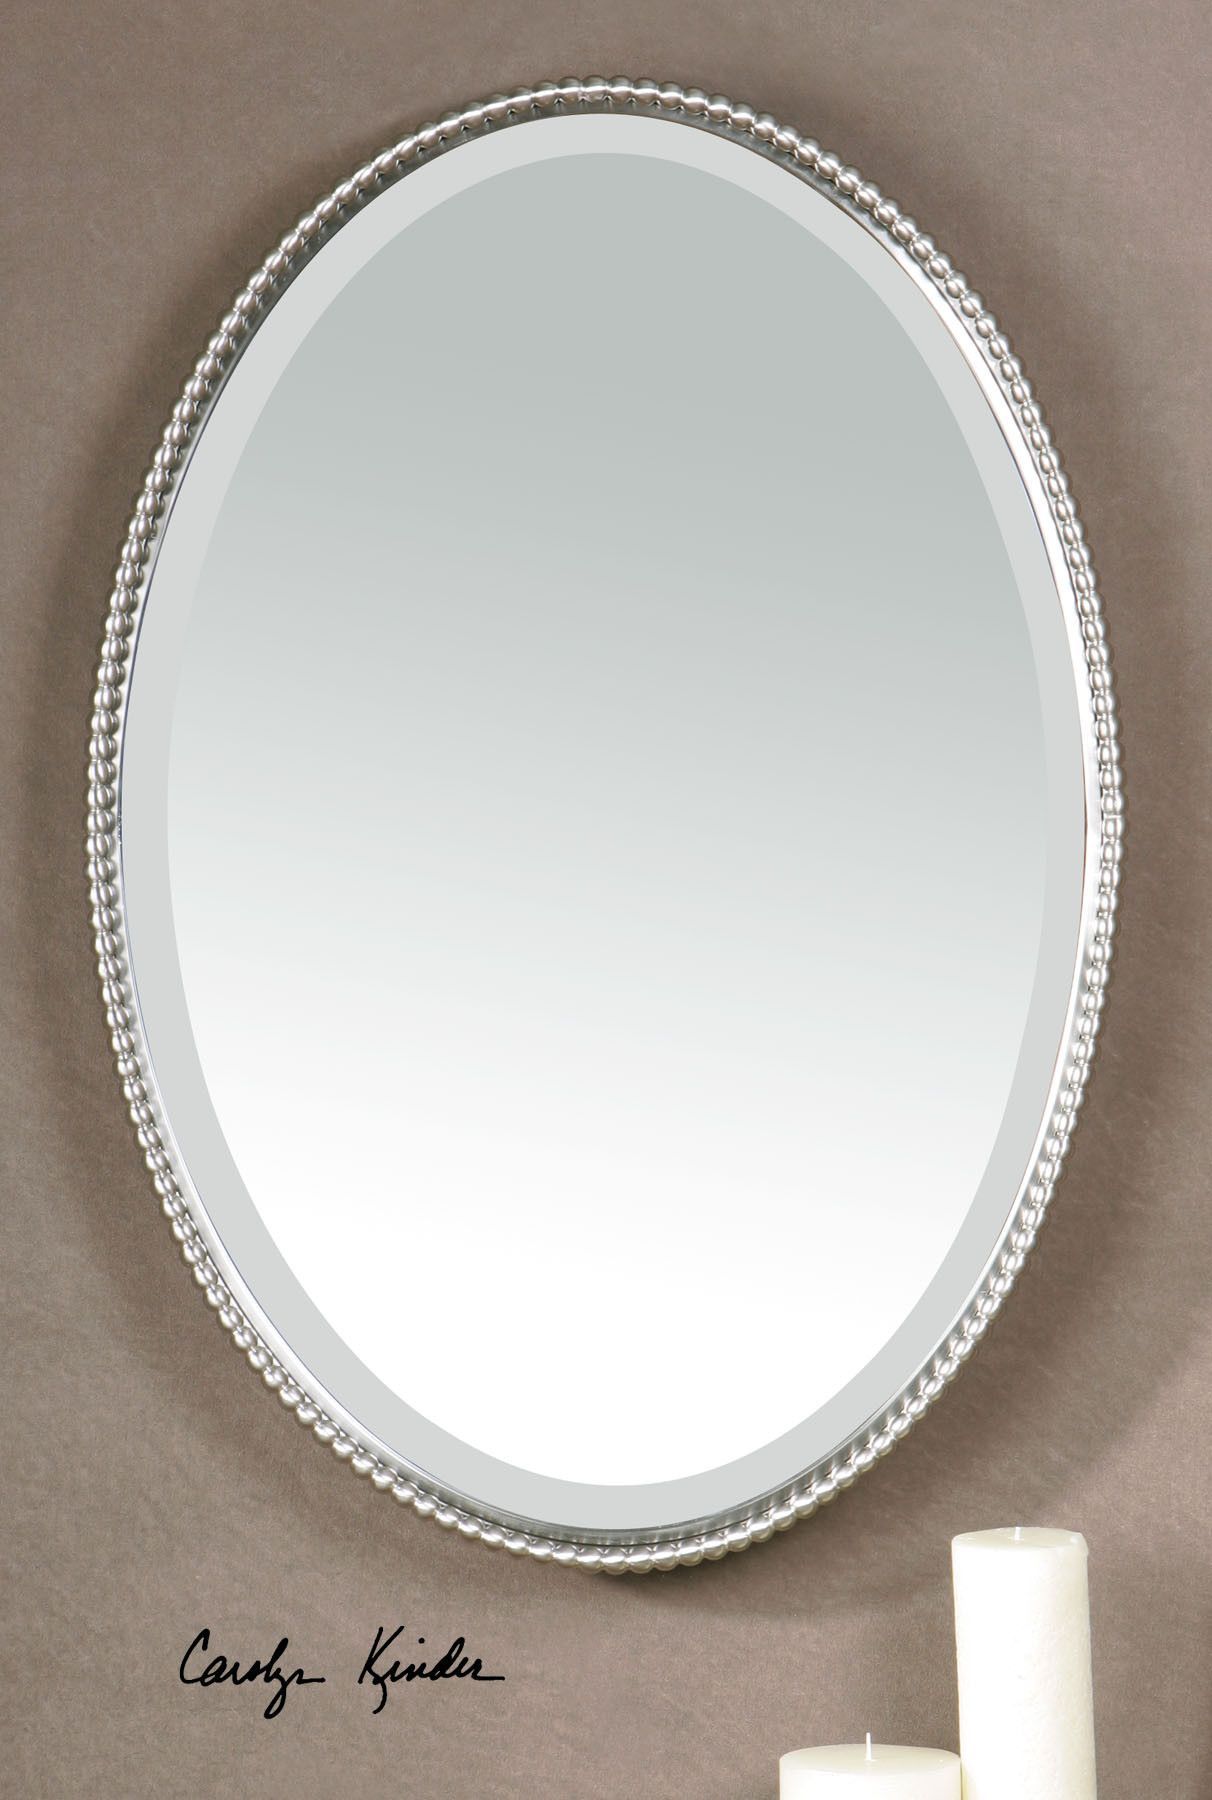 Uttermost Sherise Brushed Nickel Oval Mirror | Oval Mirror, Beaded Mirror Within Brushed Nickel Wall Mirrors (View 6 of 15)